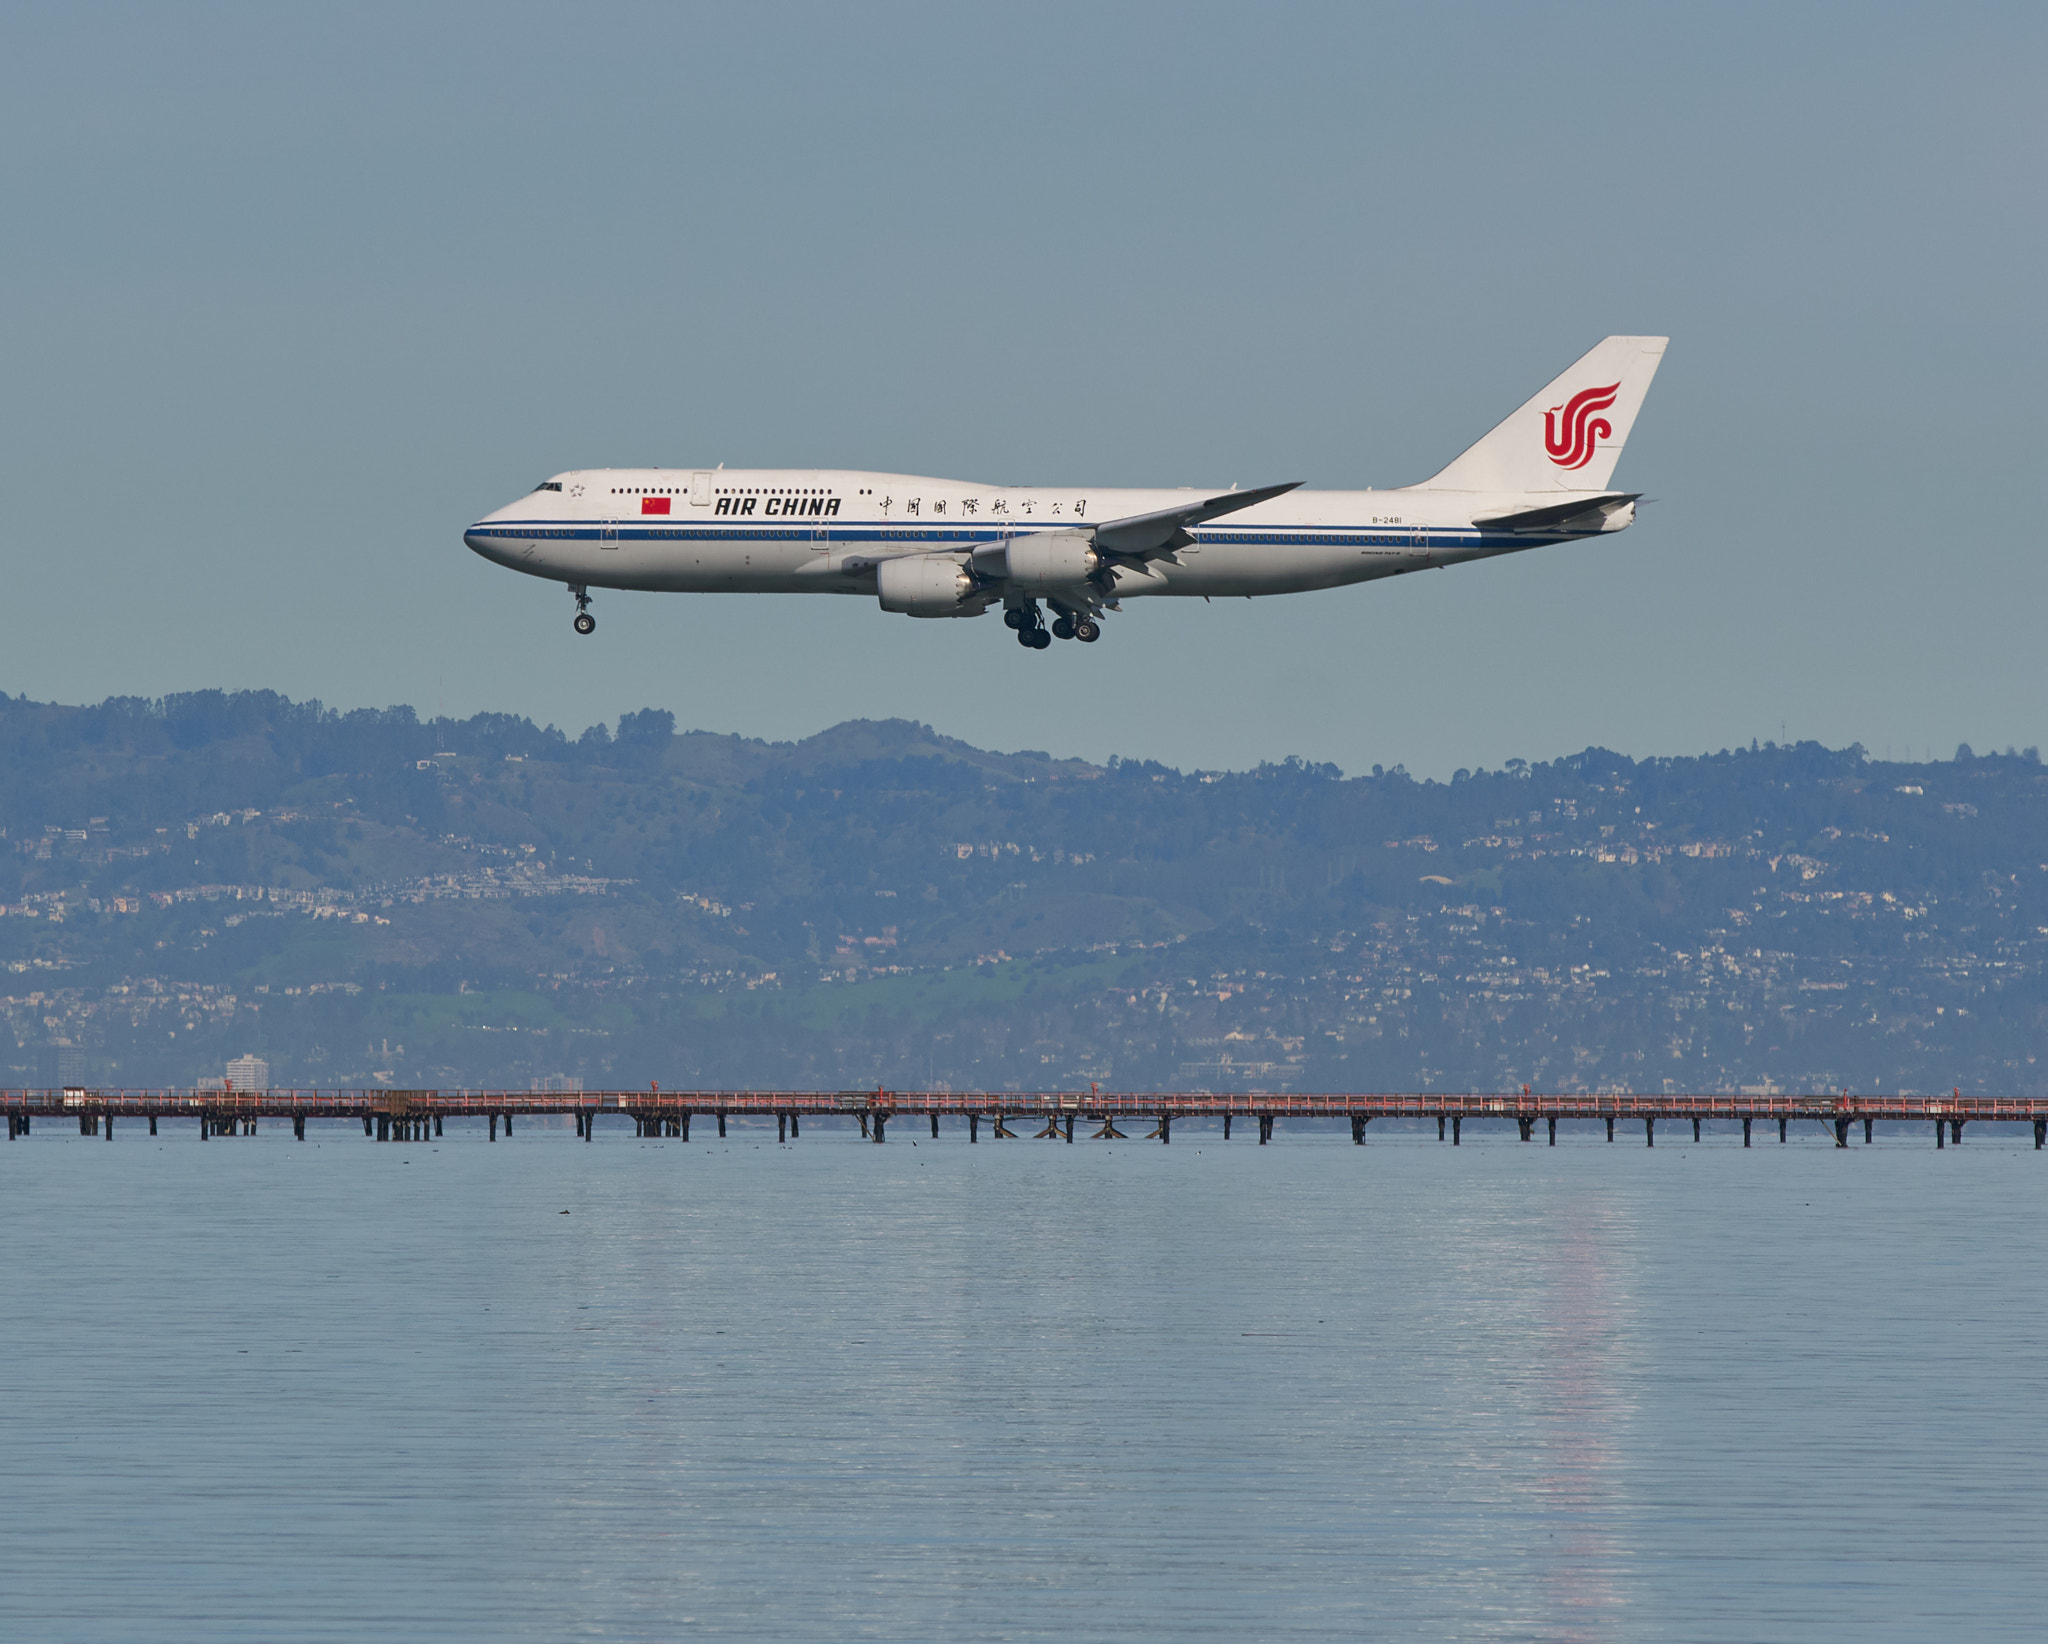 Sony a6500 sample photo. Air china and its big wings! photography